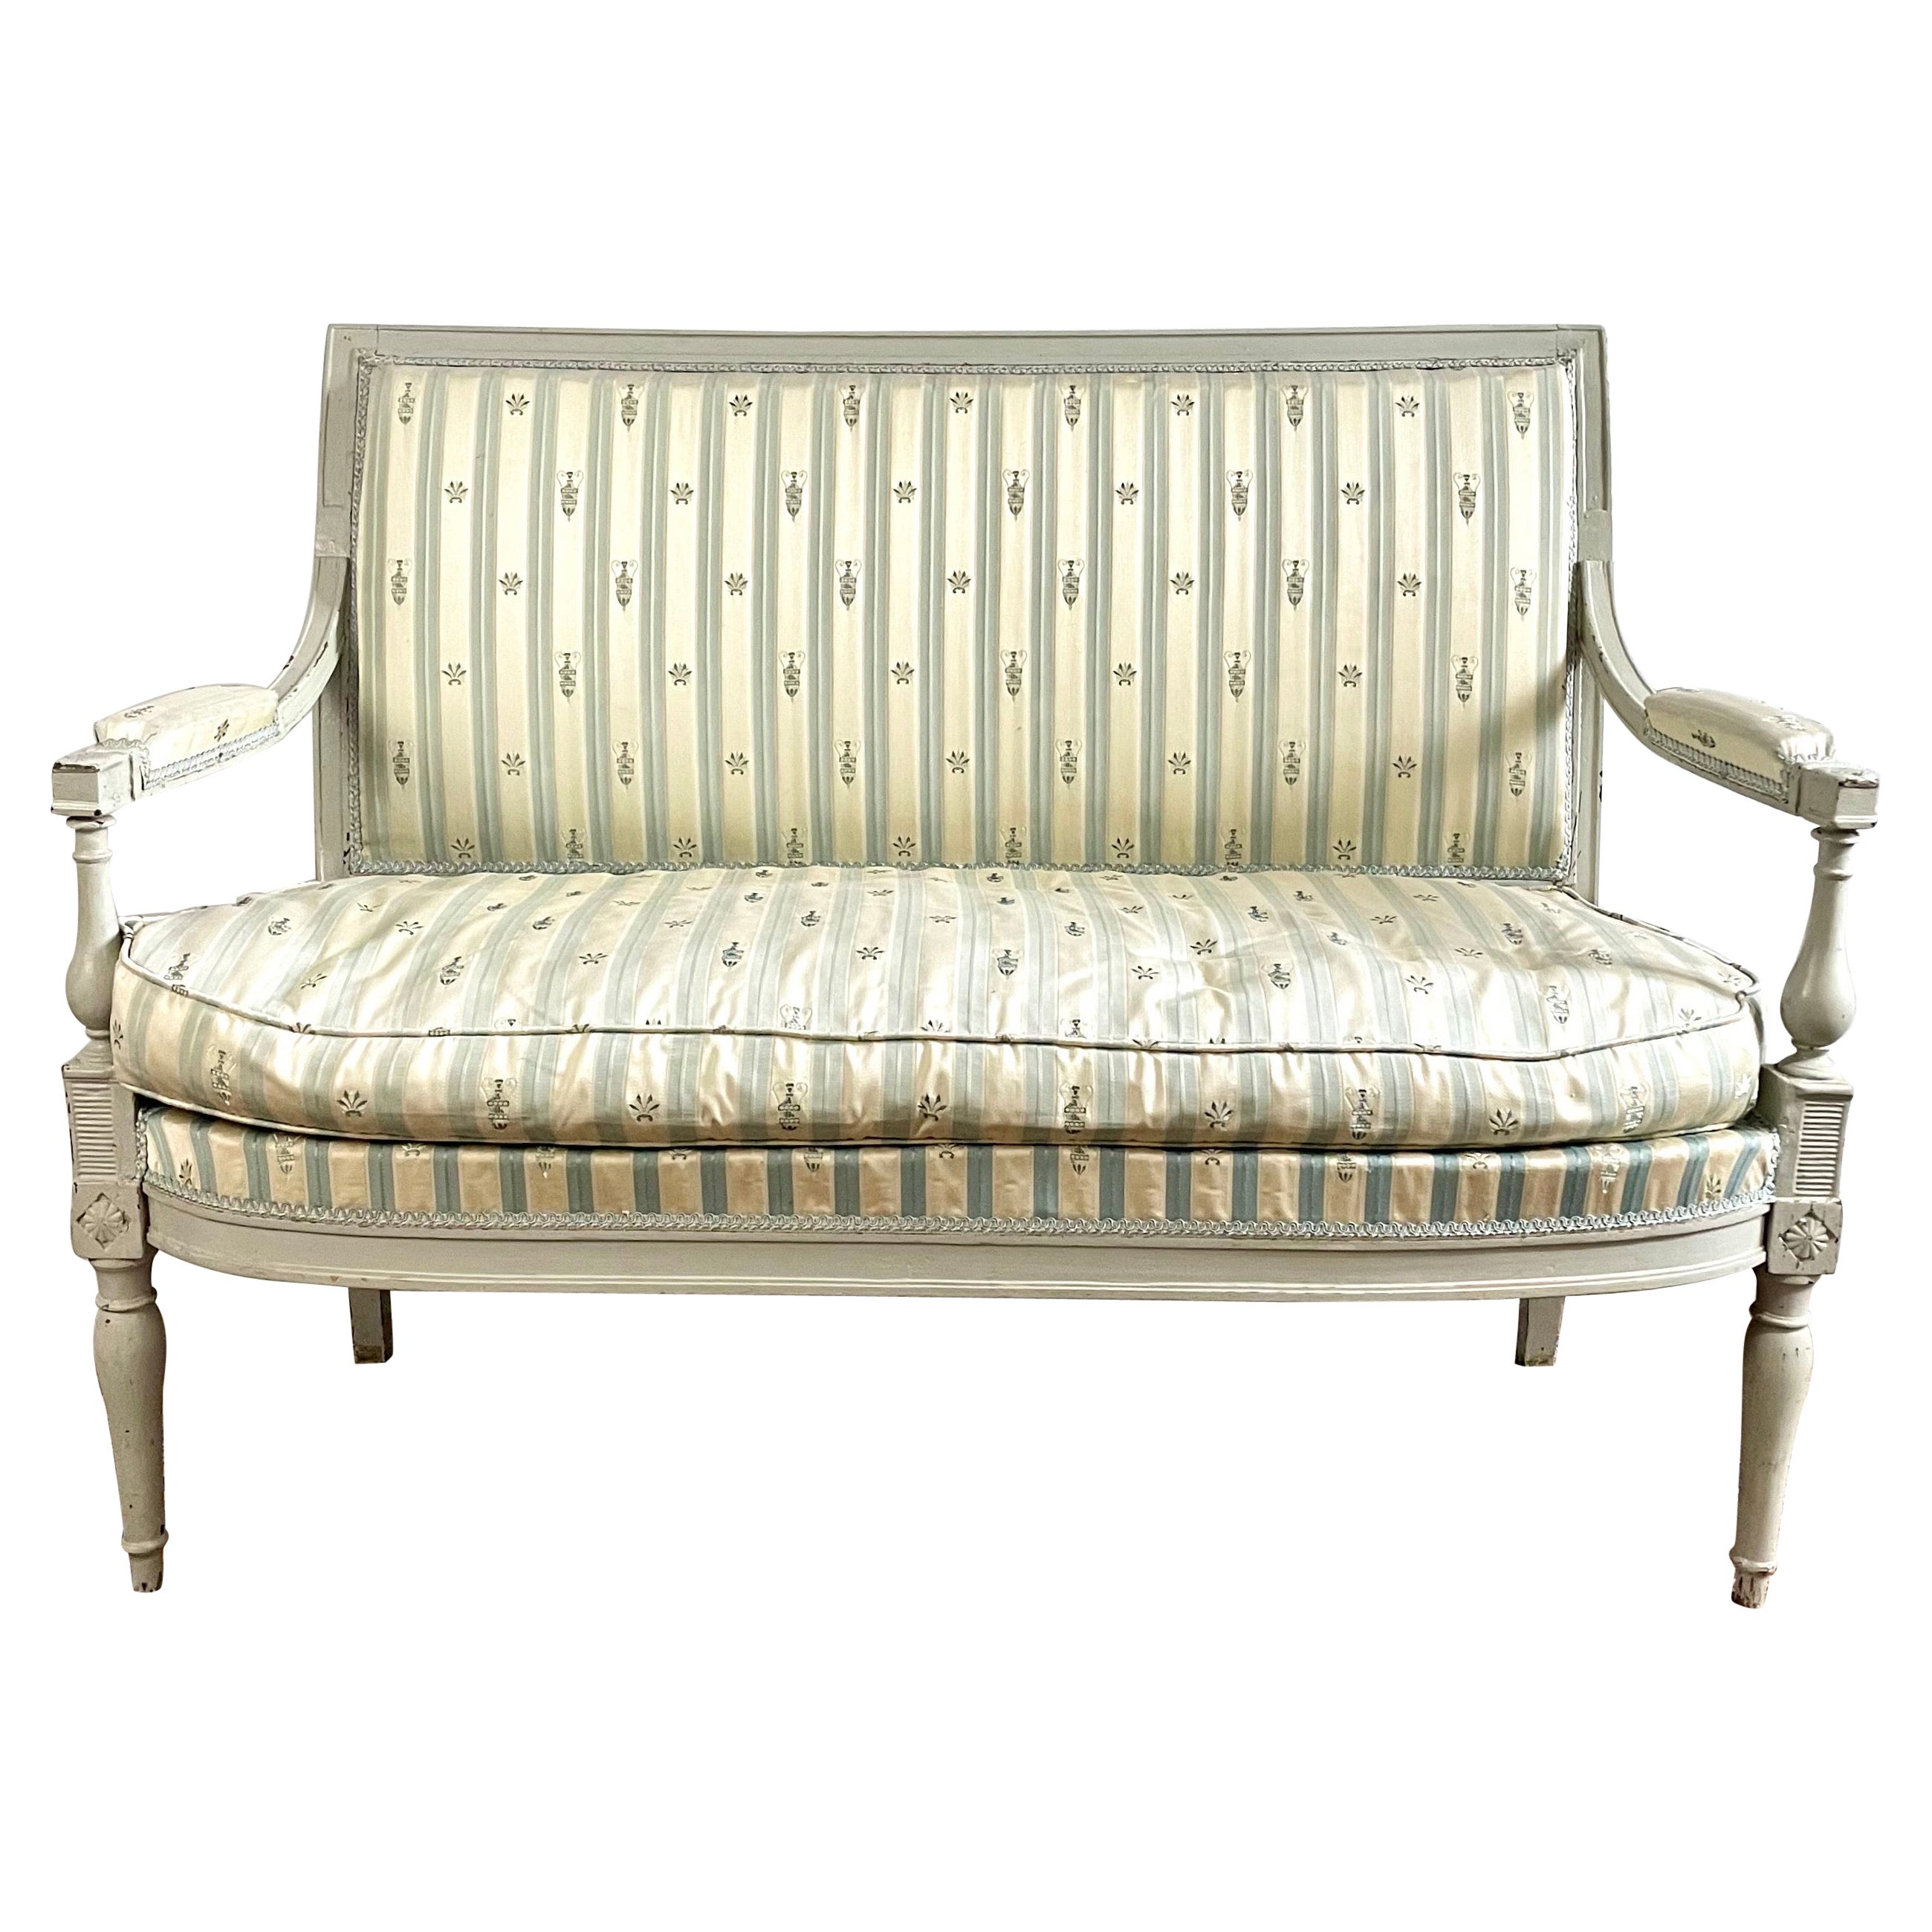 French Directoire Sofa Bench Silk Patterns Blue Gray White 18th